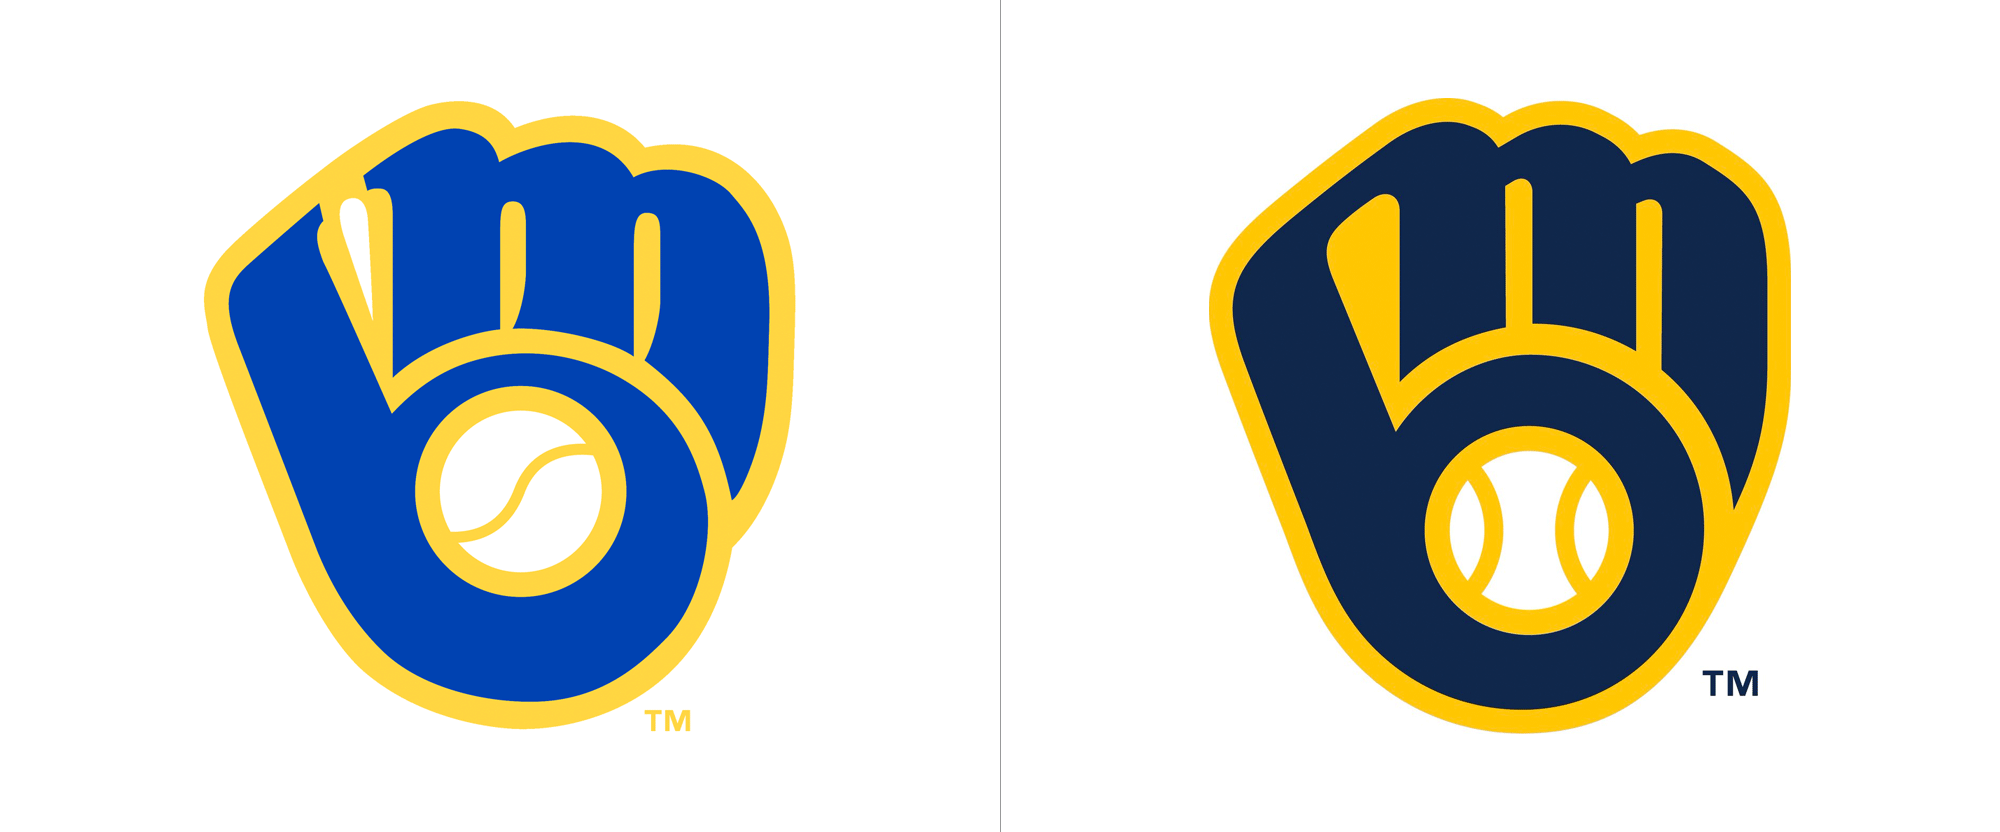 New Logos and Uniforms for Milwaukee Brewers by Rare